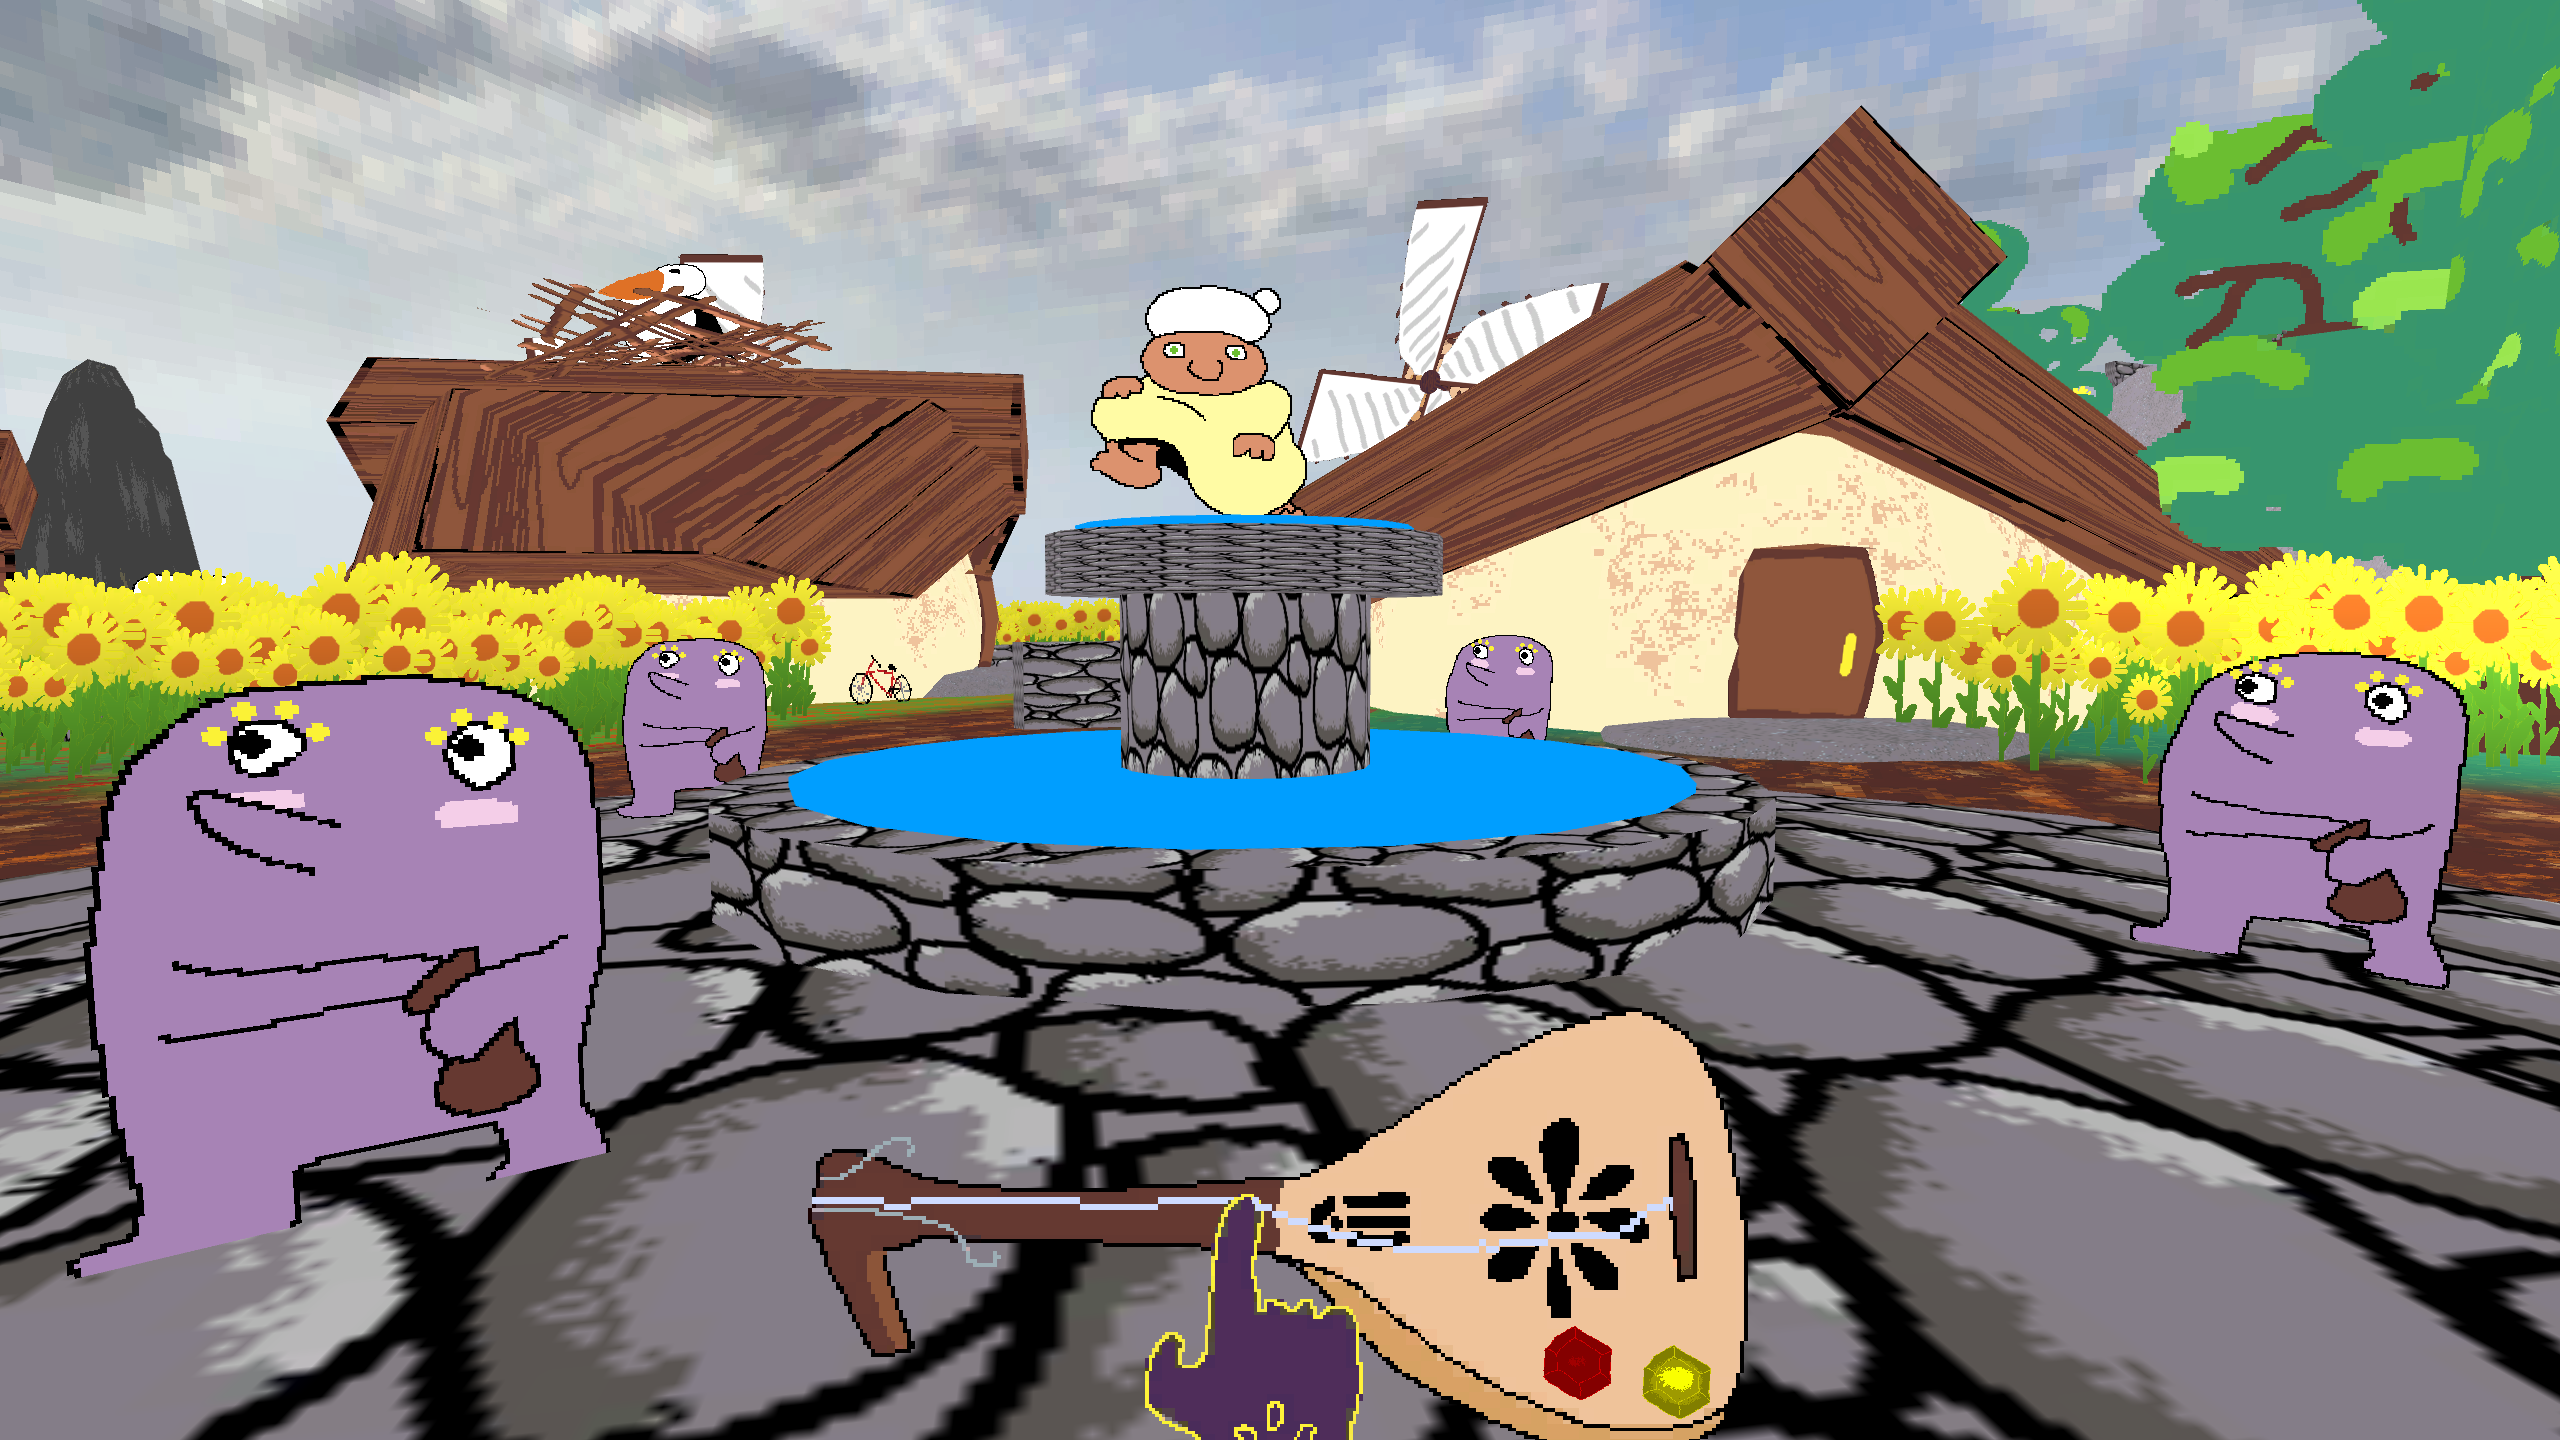 Making music with some weird lil guys and my lute in a Stomp Plonk screenshot.